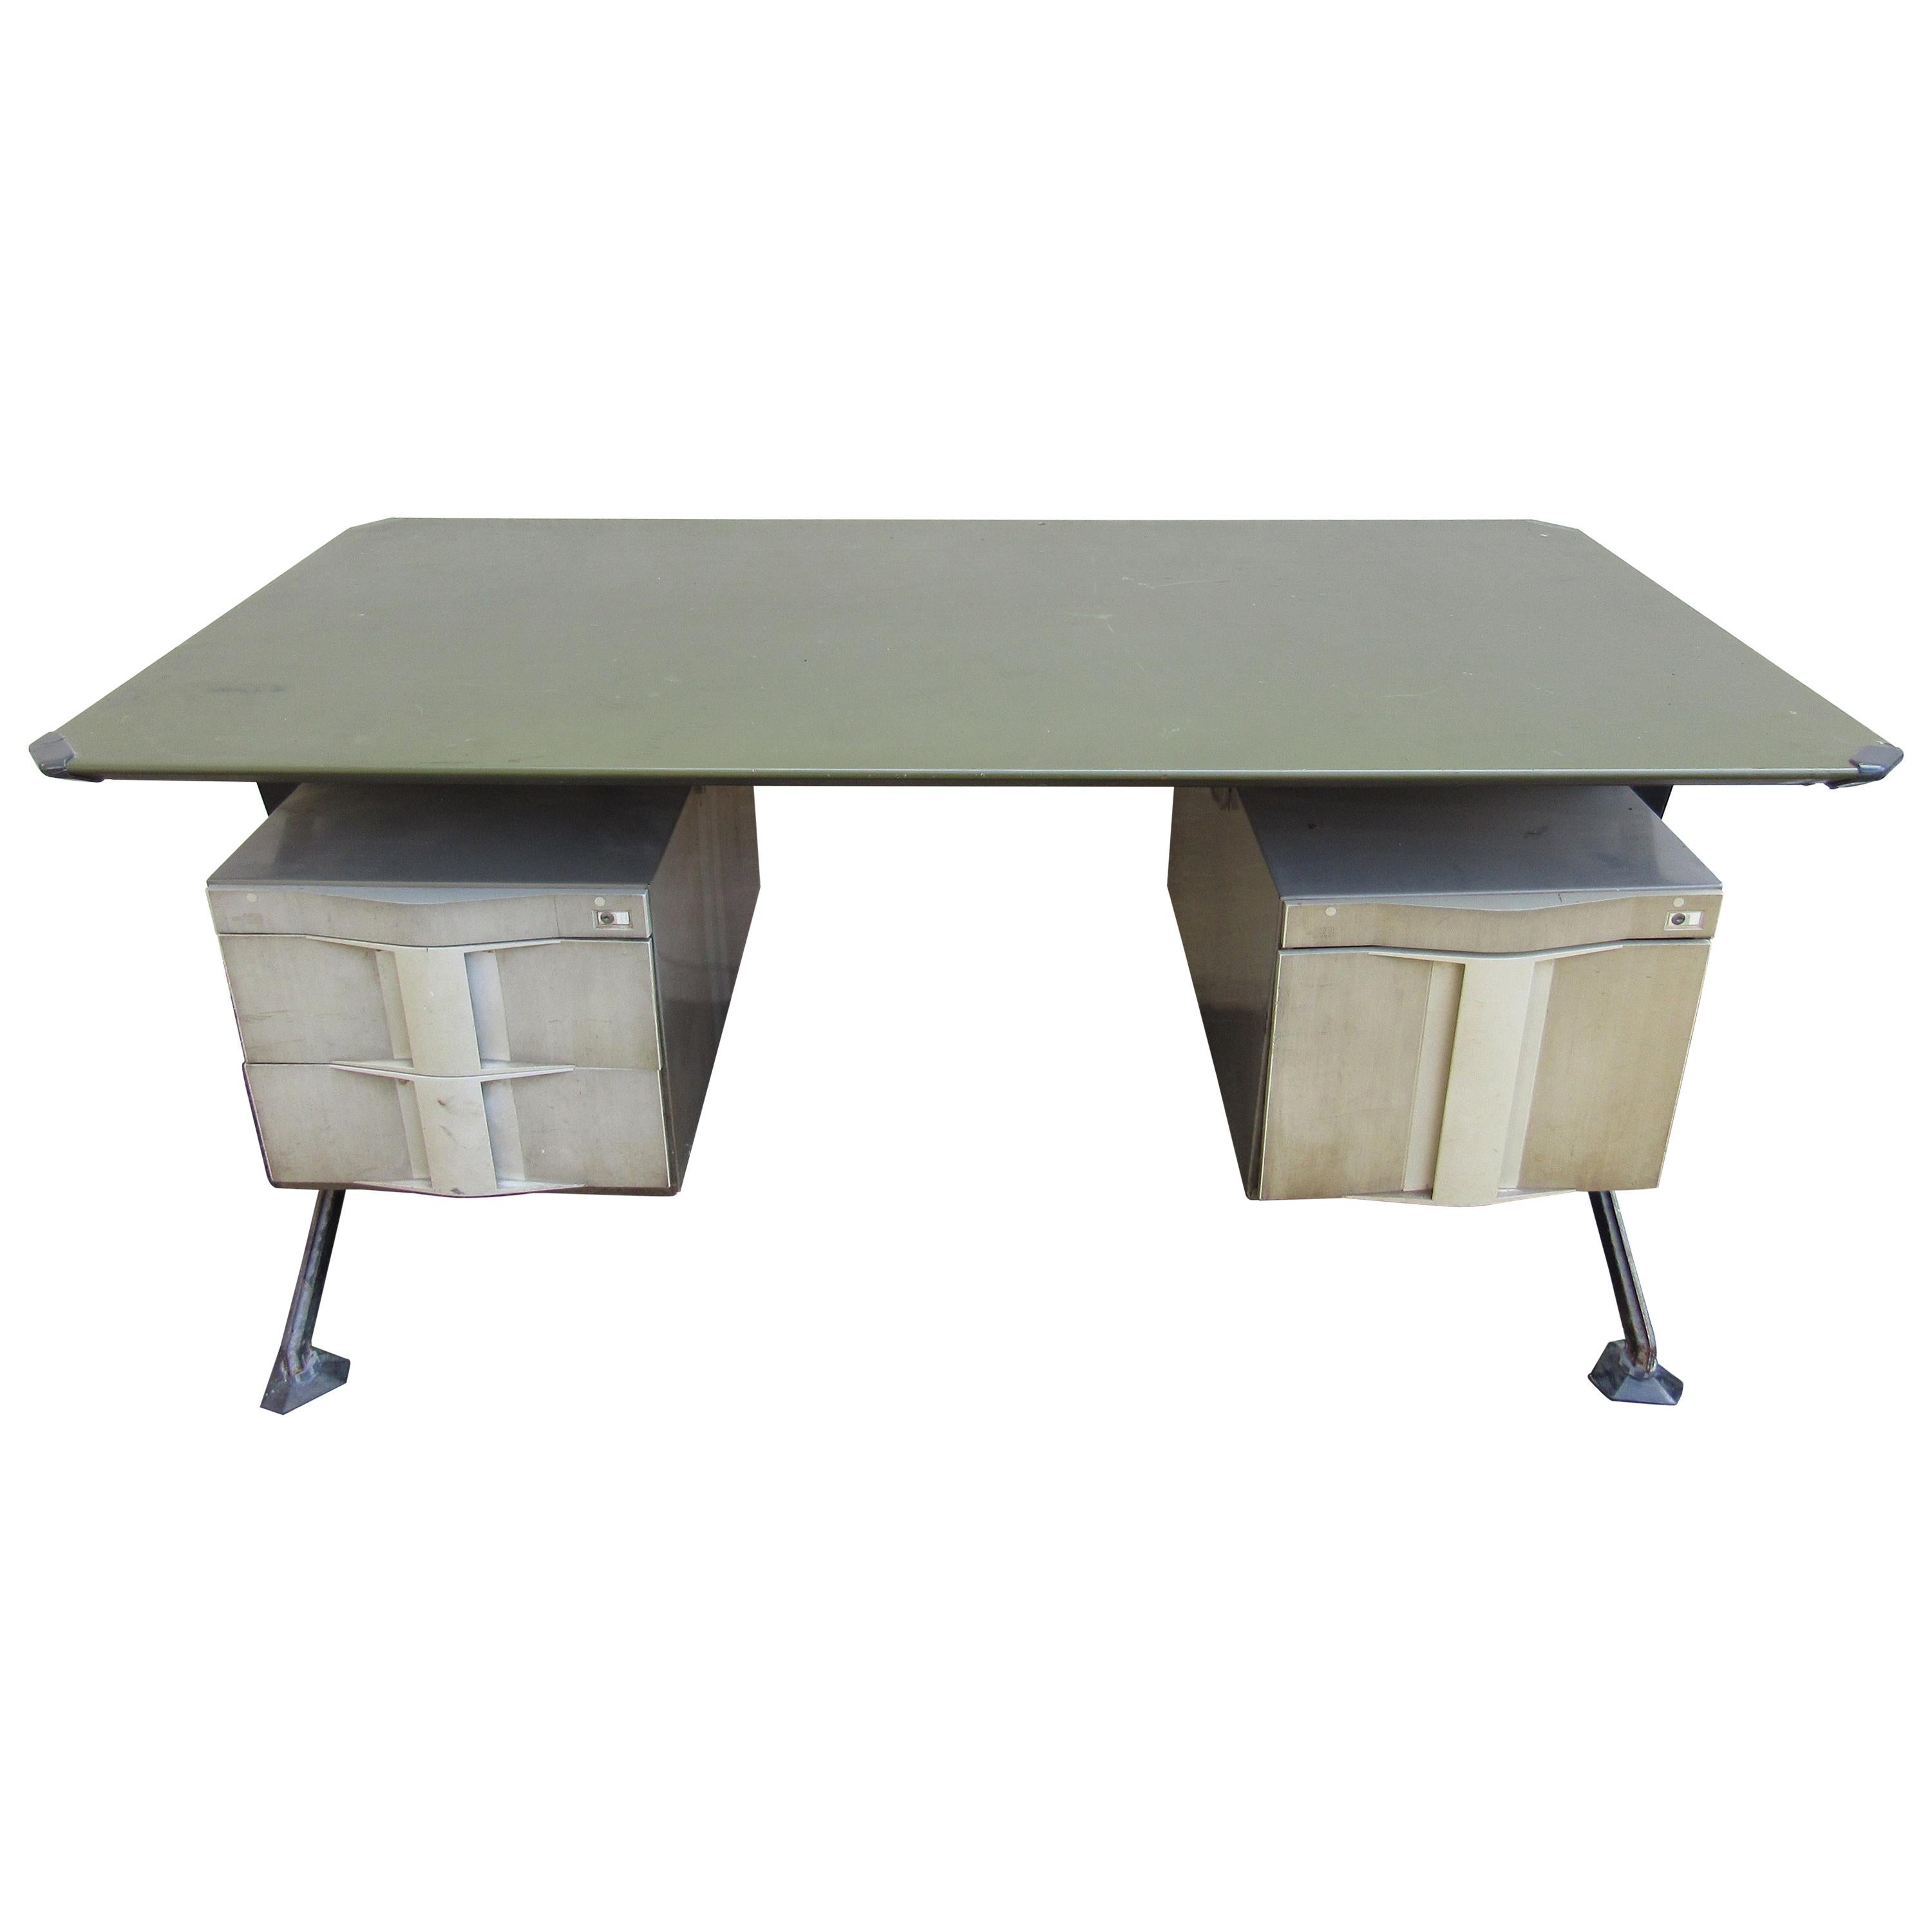 Midcentury Italian Arco Desk by BBPR for Olivetti Synthesis For Sale